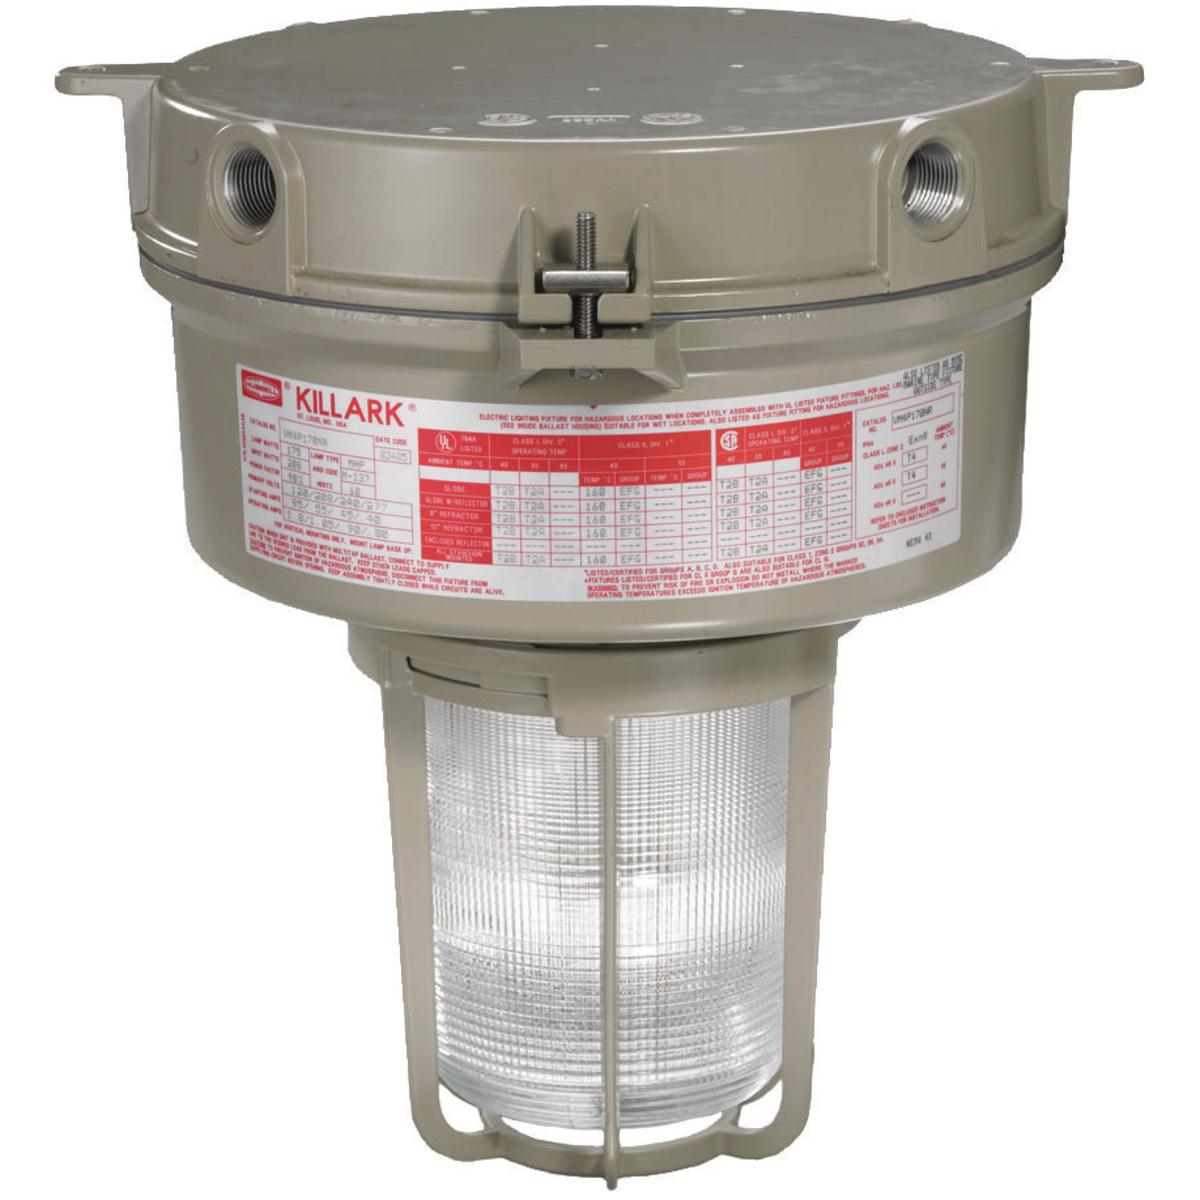 Hubbell VE3Q0084E30X2GLG VE3 84W Emergency, 120-277V, 3/4" Ceiling Mount, with Globe and Guard  ; Quad-Pin triple-tube long-life compact fluorescent lamps included ; World Voltage 120-277VAC 50-60 Hz ; LED charging indicator light visible through lens ; Prewired terminal block fo